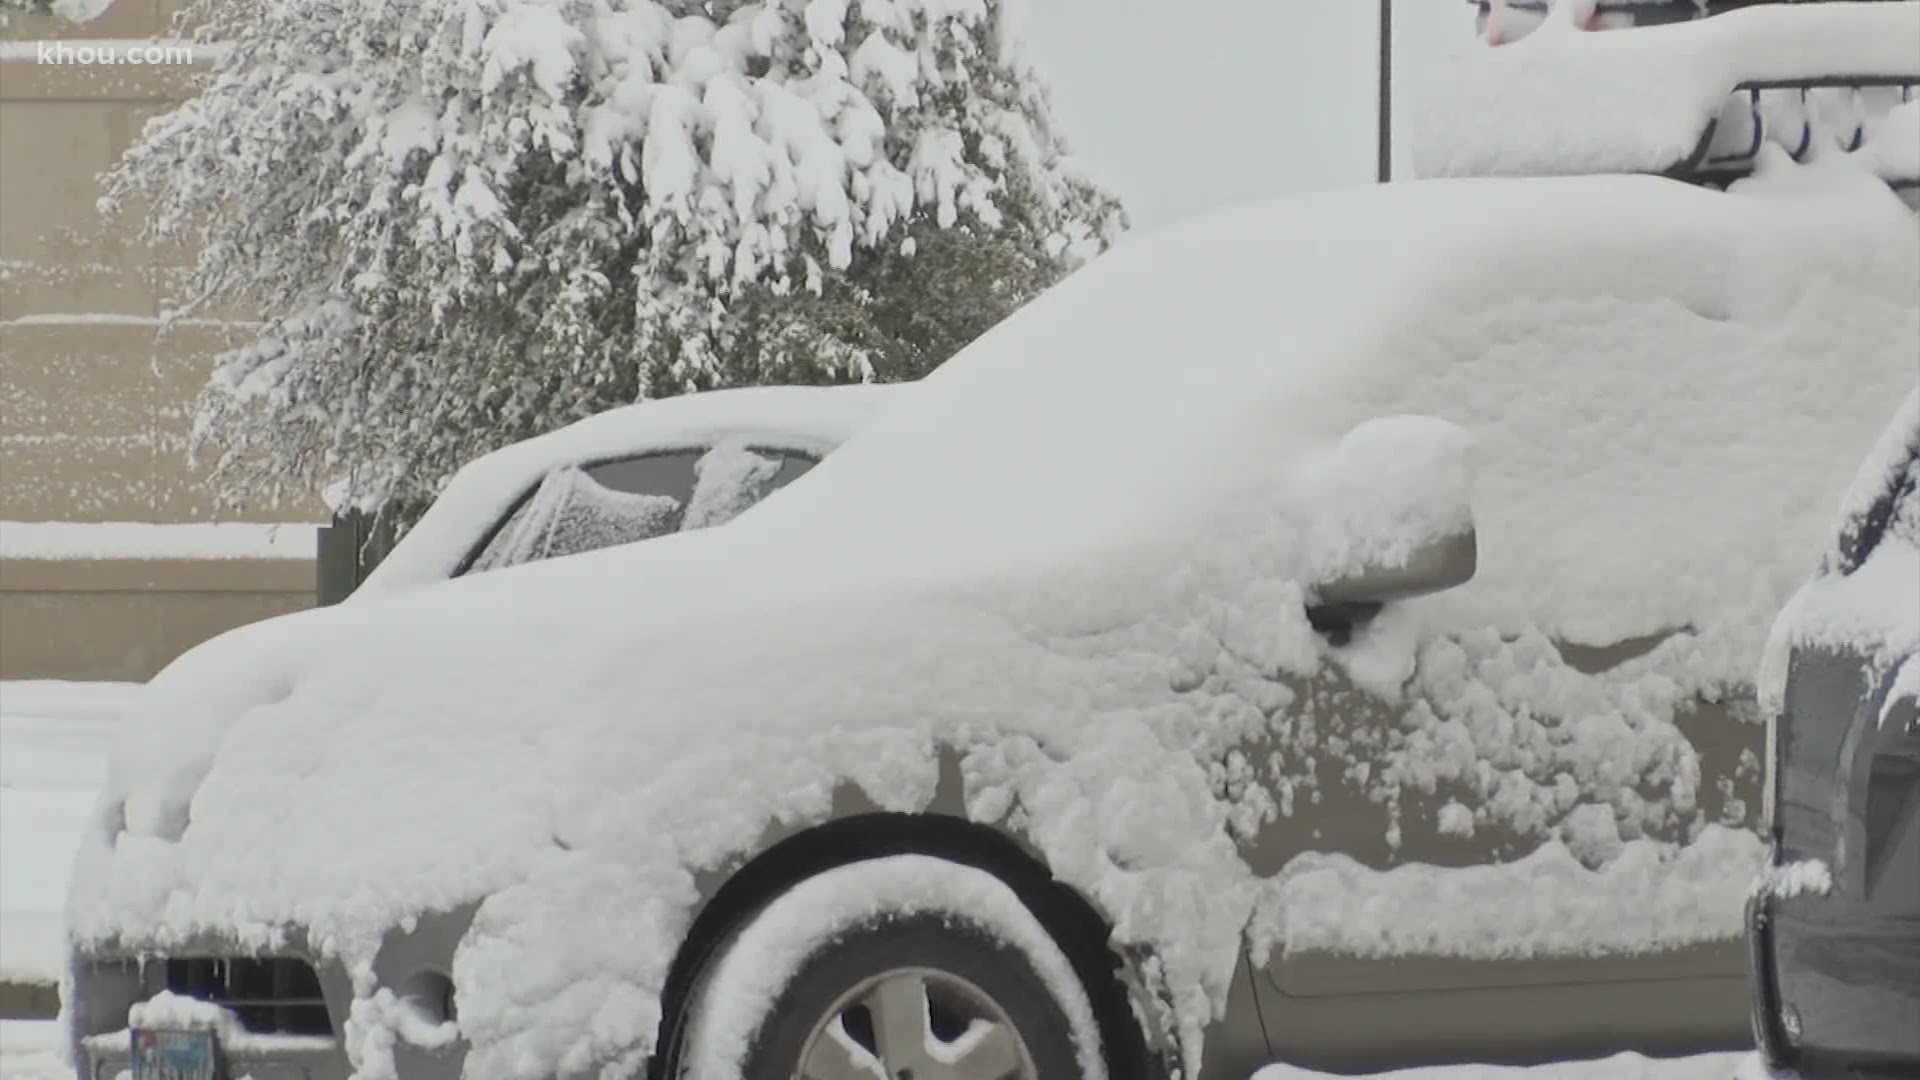 A storm system dumped several inches of snow on communities in West Texas overnight.